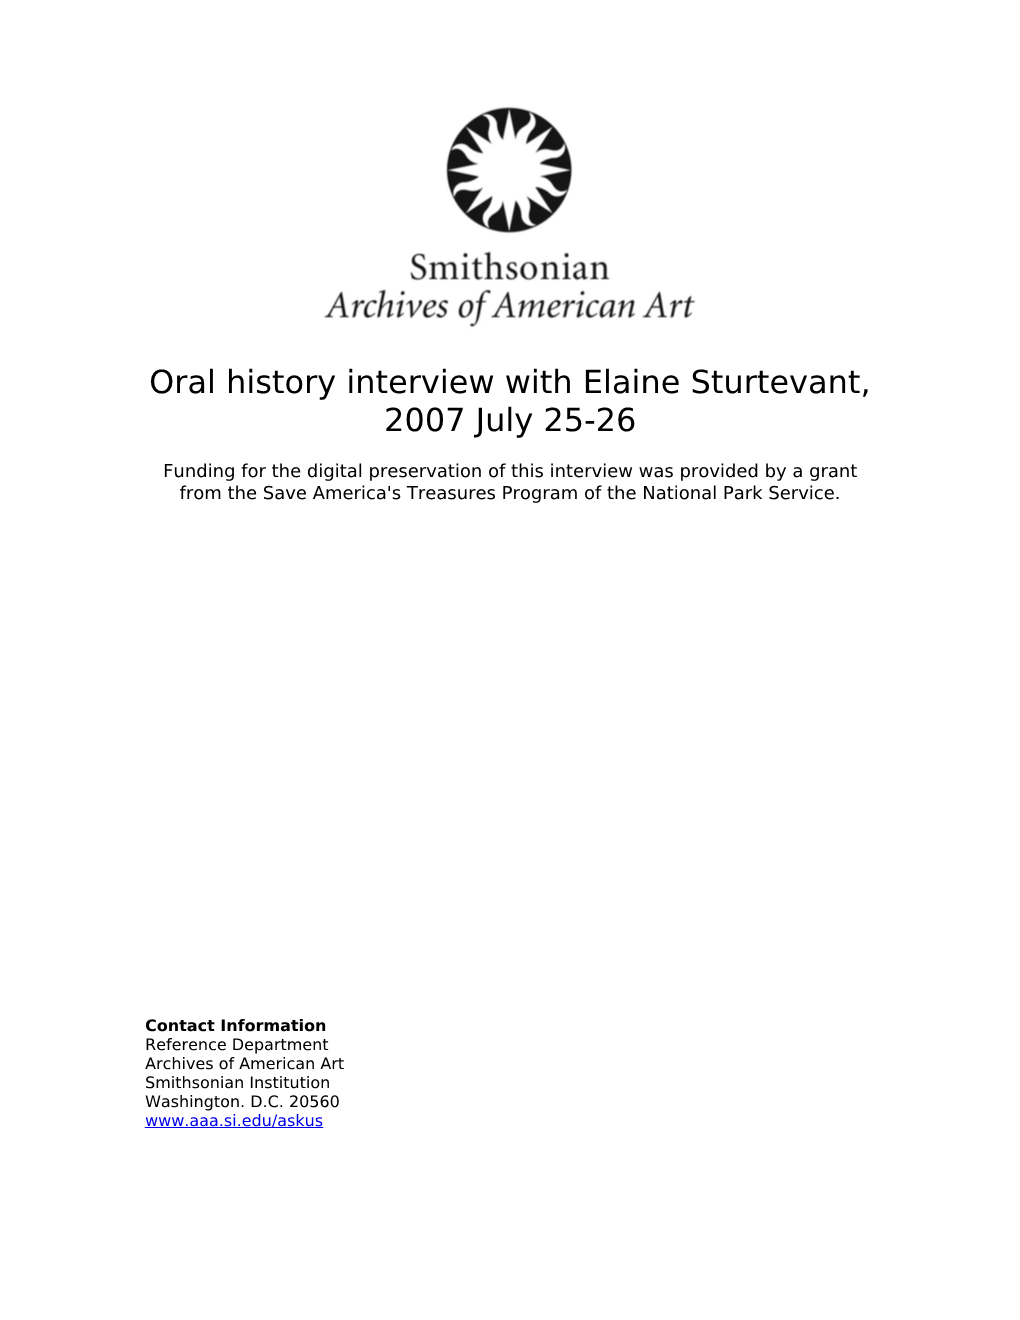 Oral History Interview with Elaine Sturtevant, 2007 July 25-26